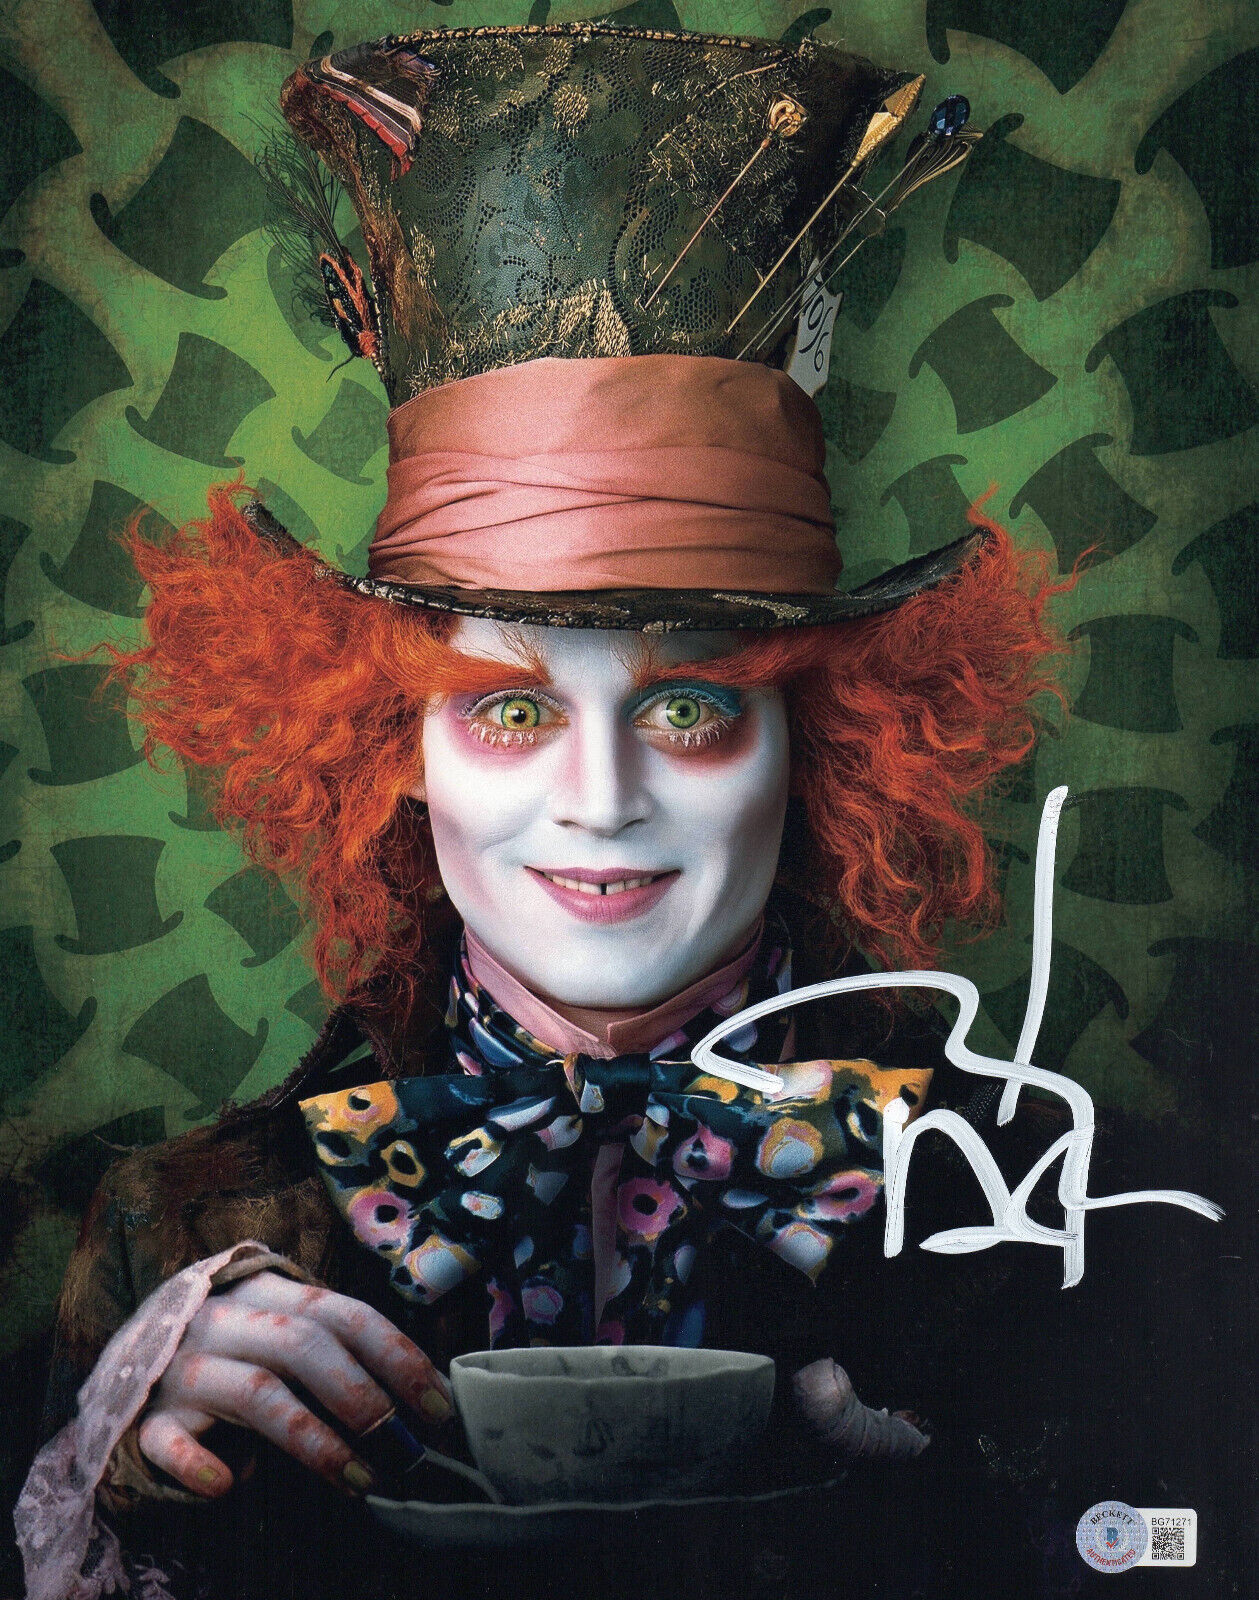 JOHNNY DEPP SIGNED ALICE THROUGH THE LOOKING GLASS  11X14 PHOTO AUTO BECKETT BAS